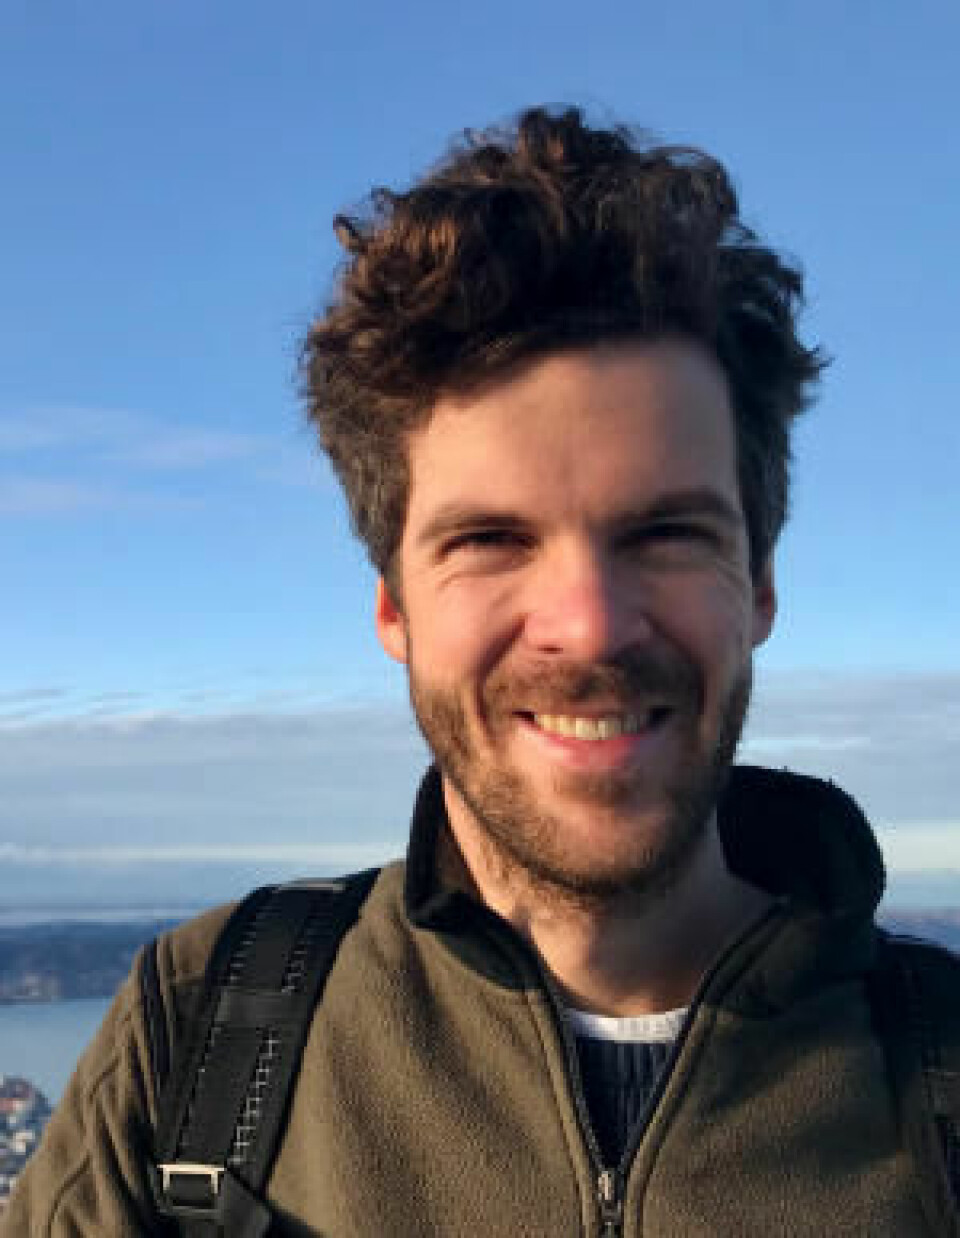 Thomas Leutert is today Postdoc at the Max Planck Institute for Chemistry in Germany. The new study is a part of his PhD thesis at the University of Bergen and the Bjerknes Centre for Climate Research.